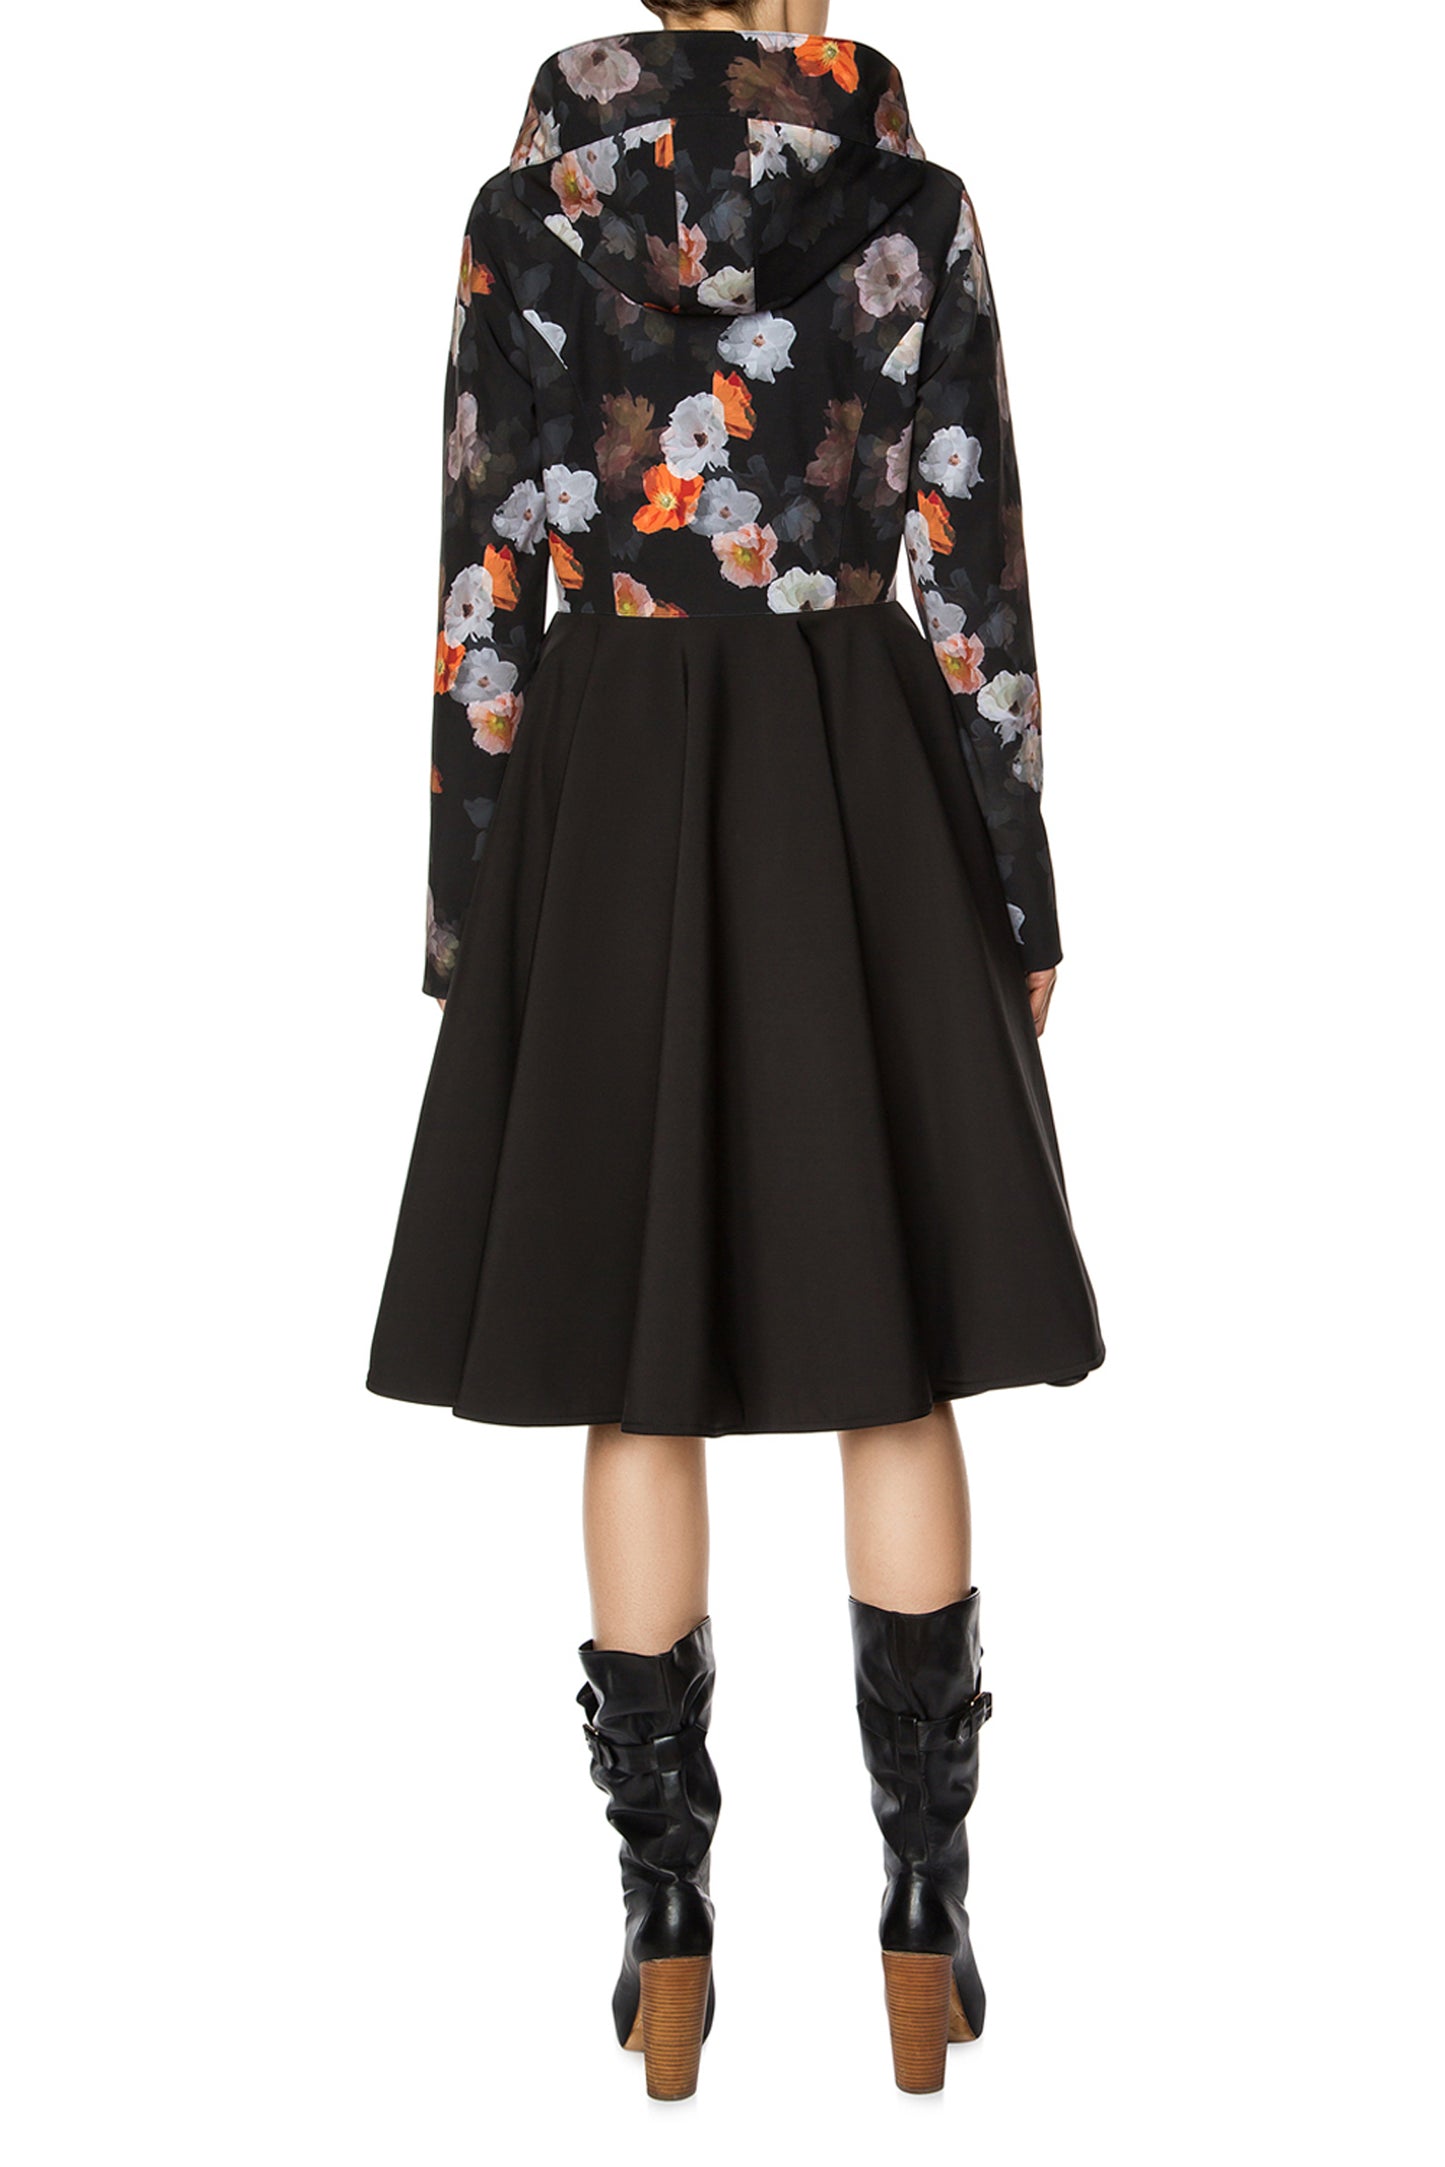 Black Flared Coat with Floral print on top part